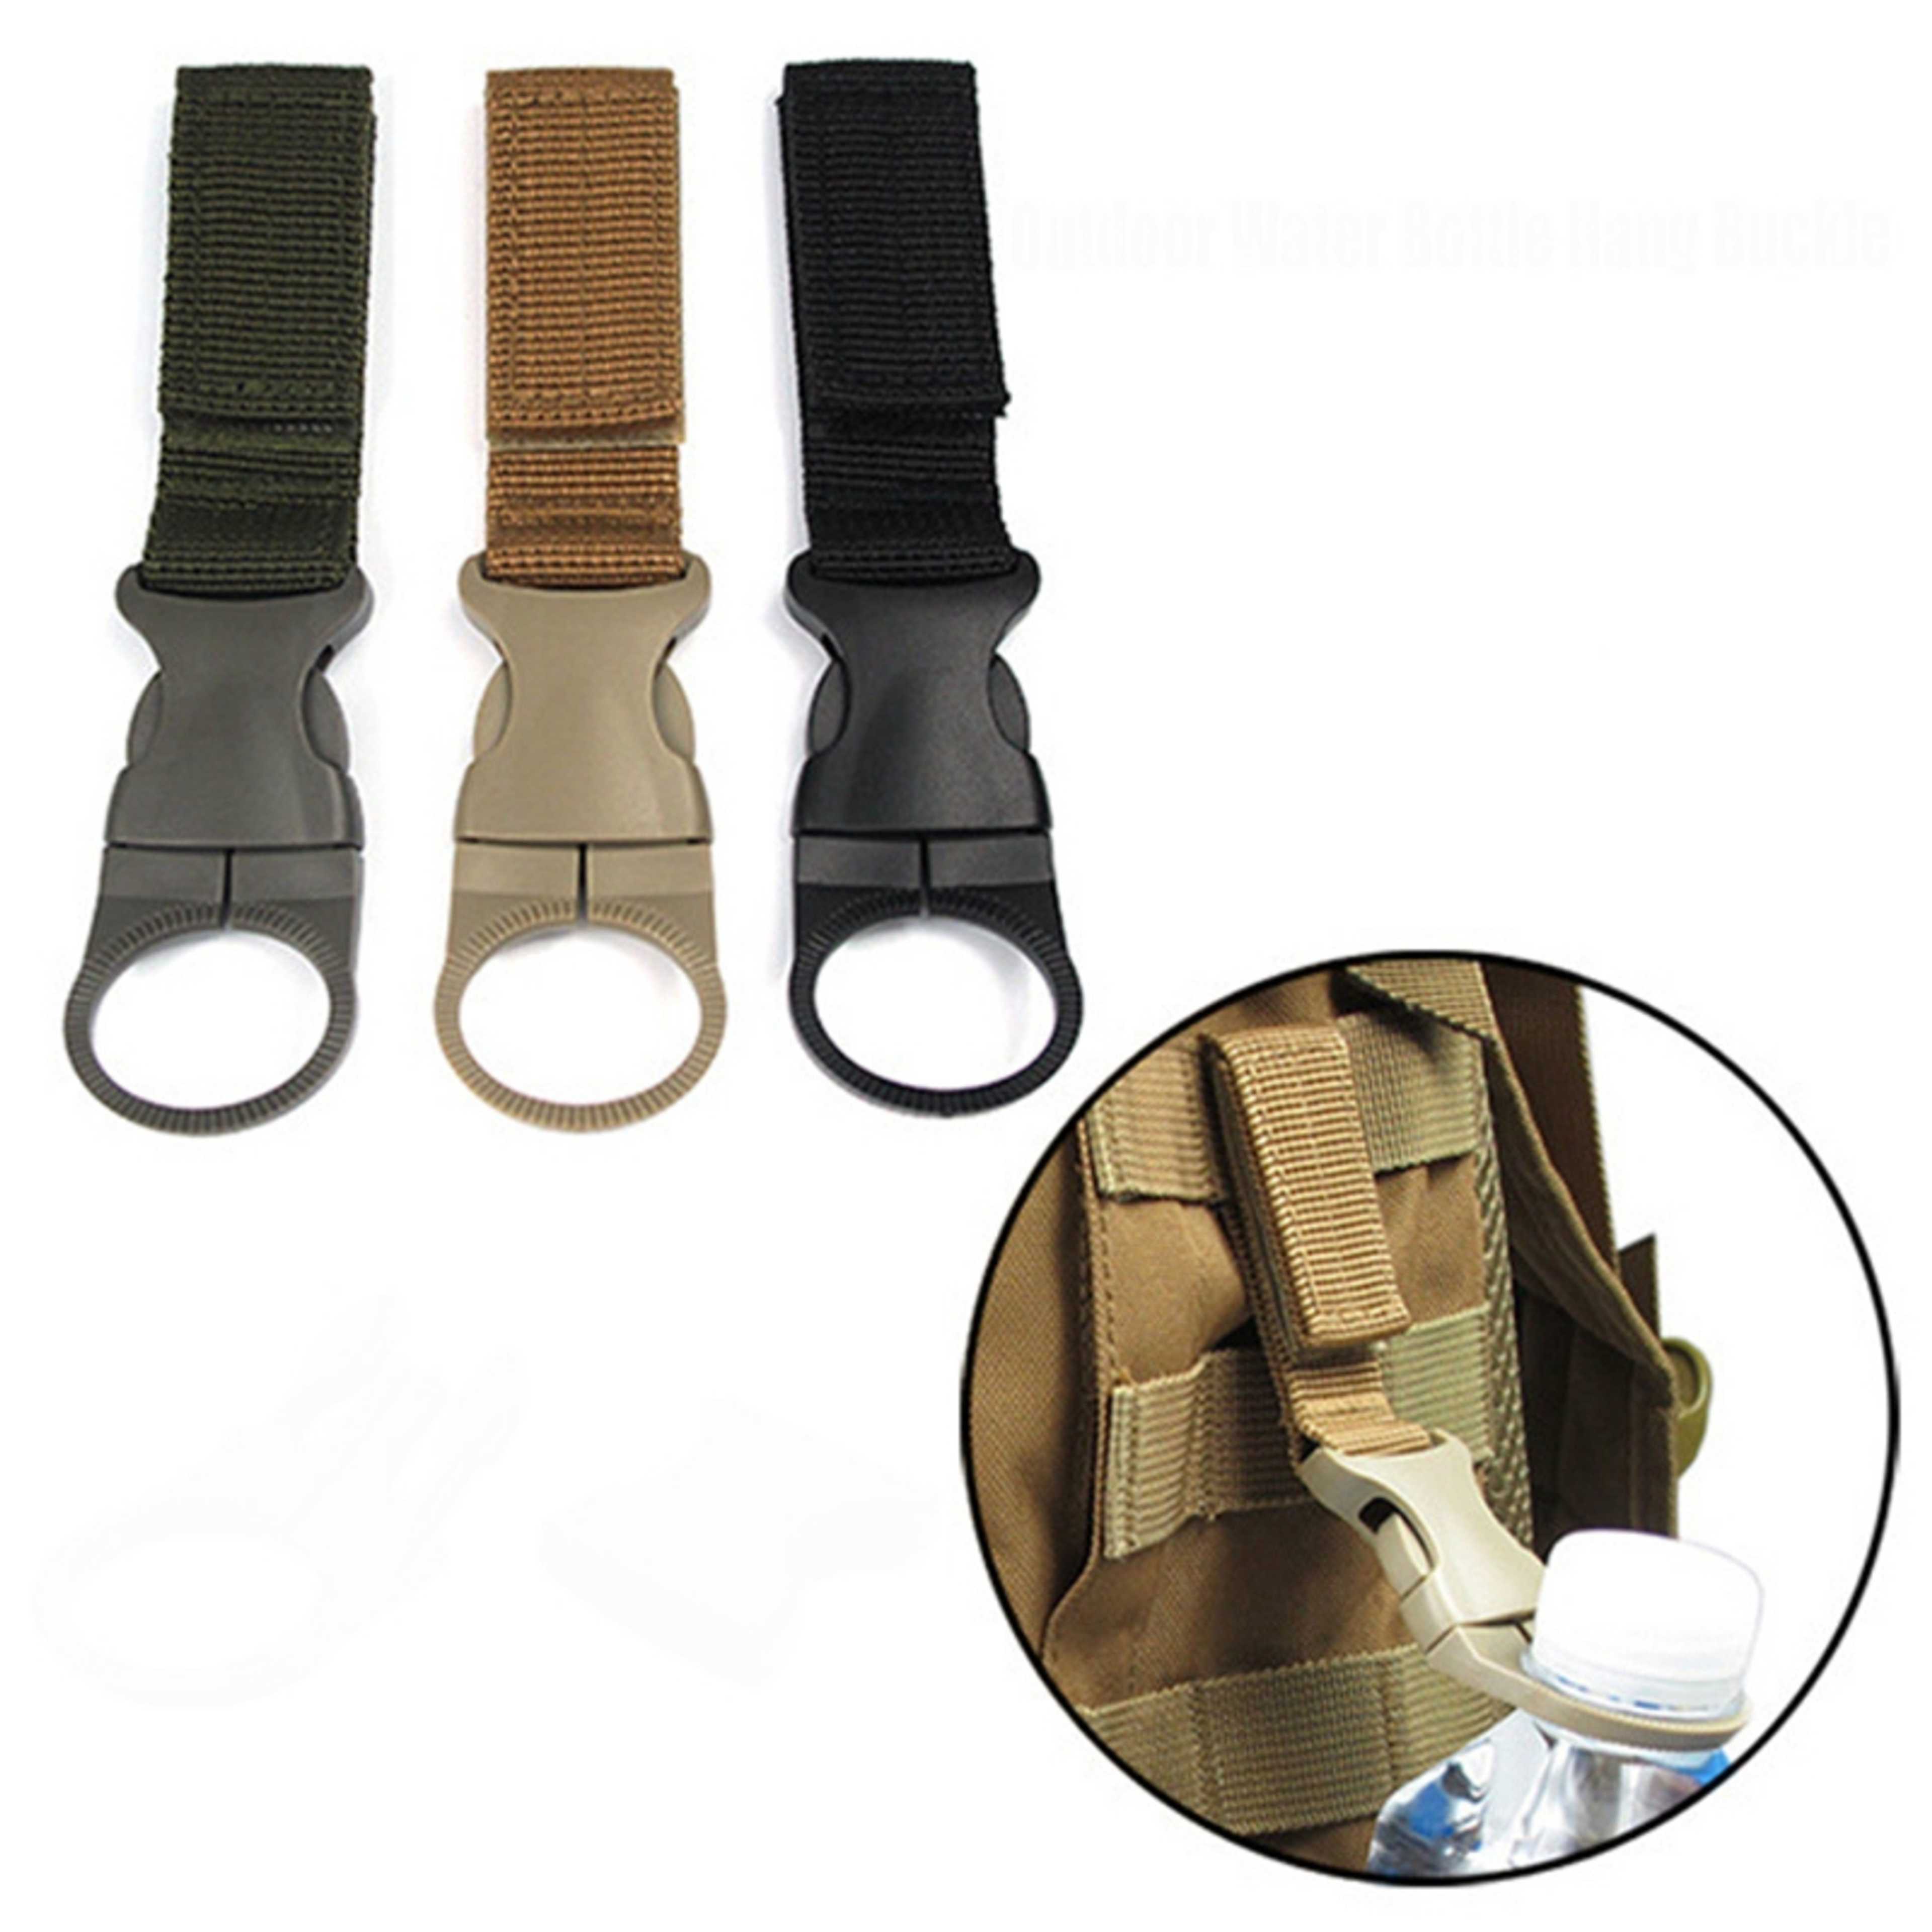 Water bottle holder, nylon buckle hook for outdoor use - 1pc